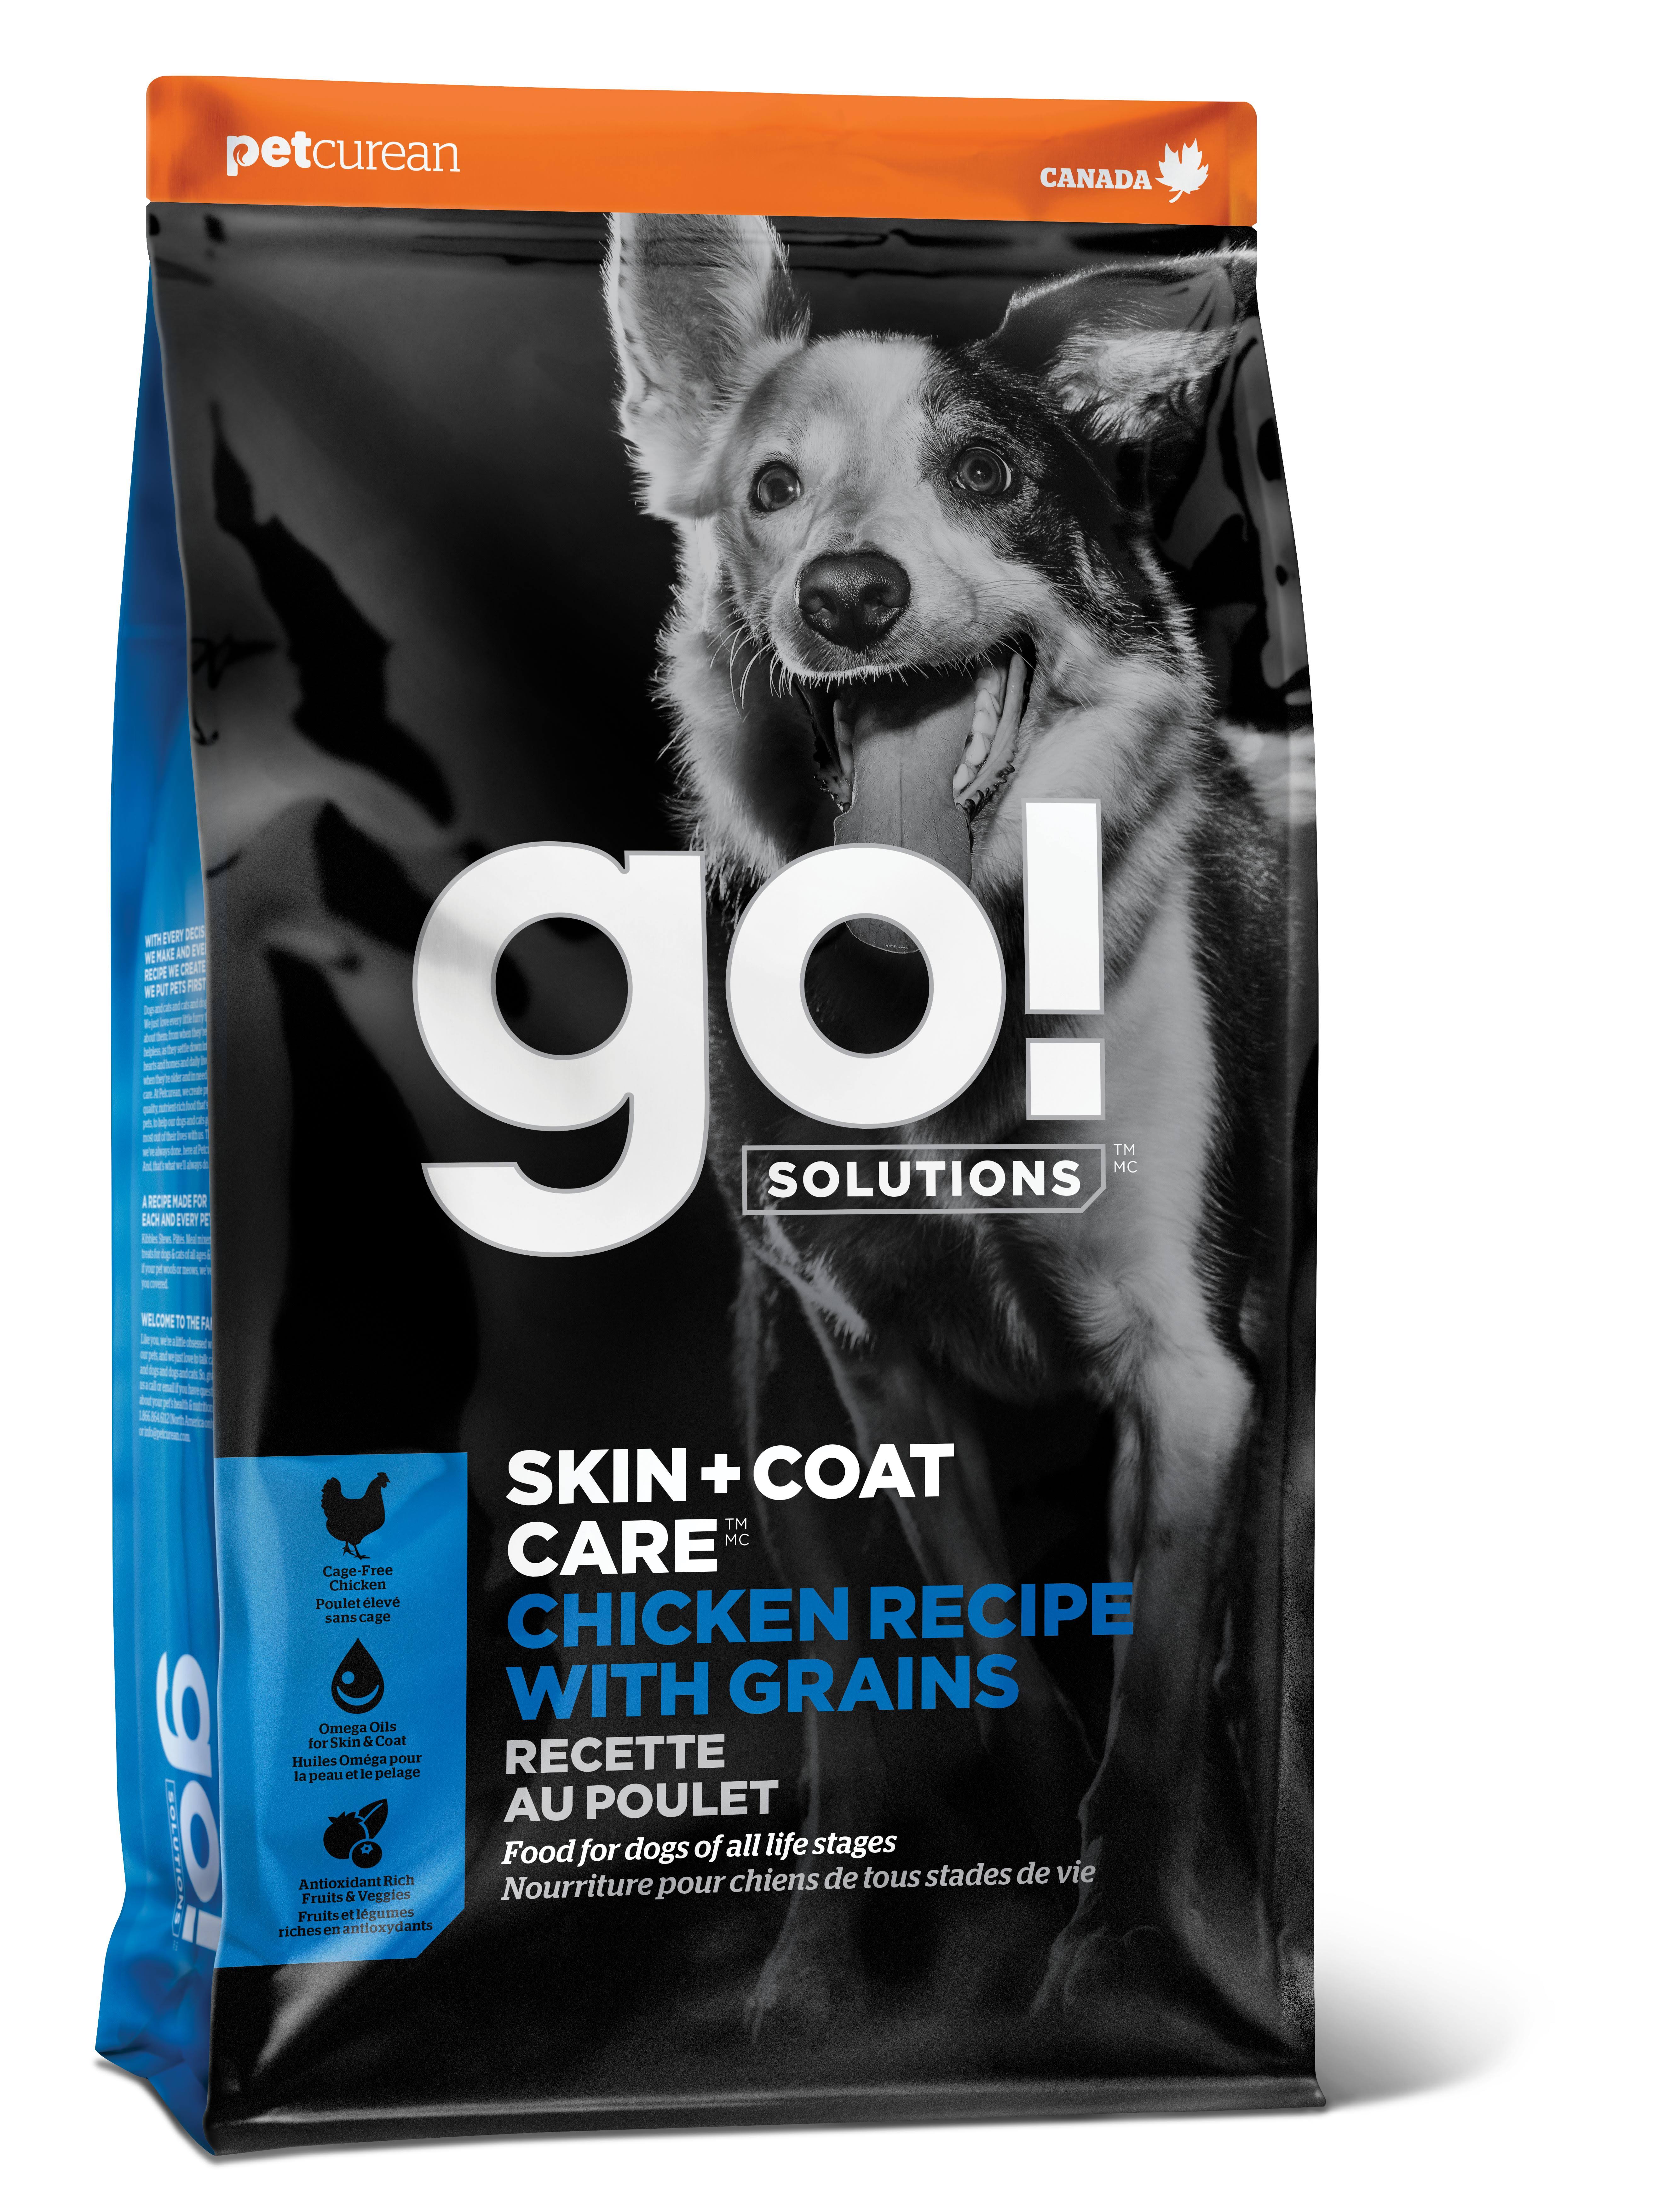 Go! Solutions Skin + Coat Care Chicken Recipe Dry Dog Food, 3.5 Pounds